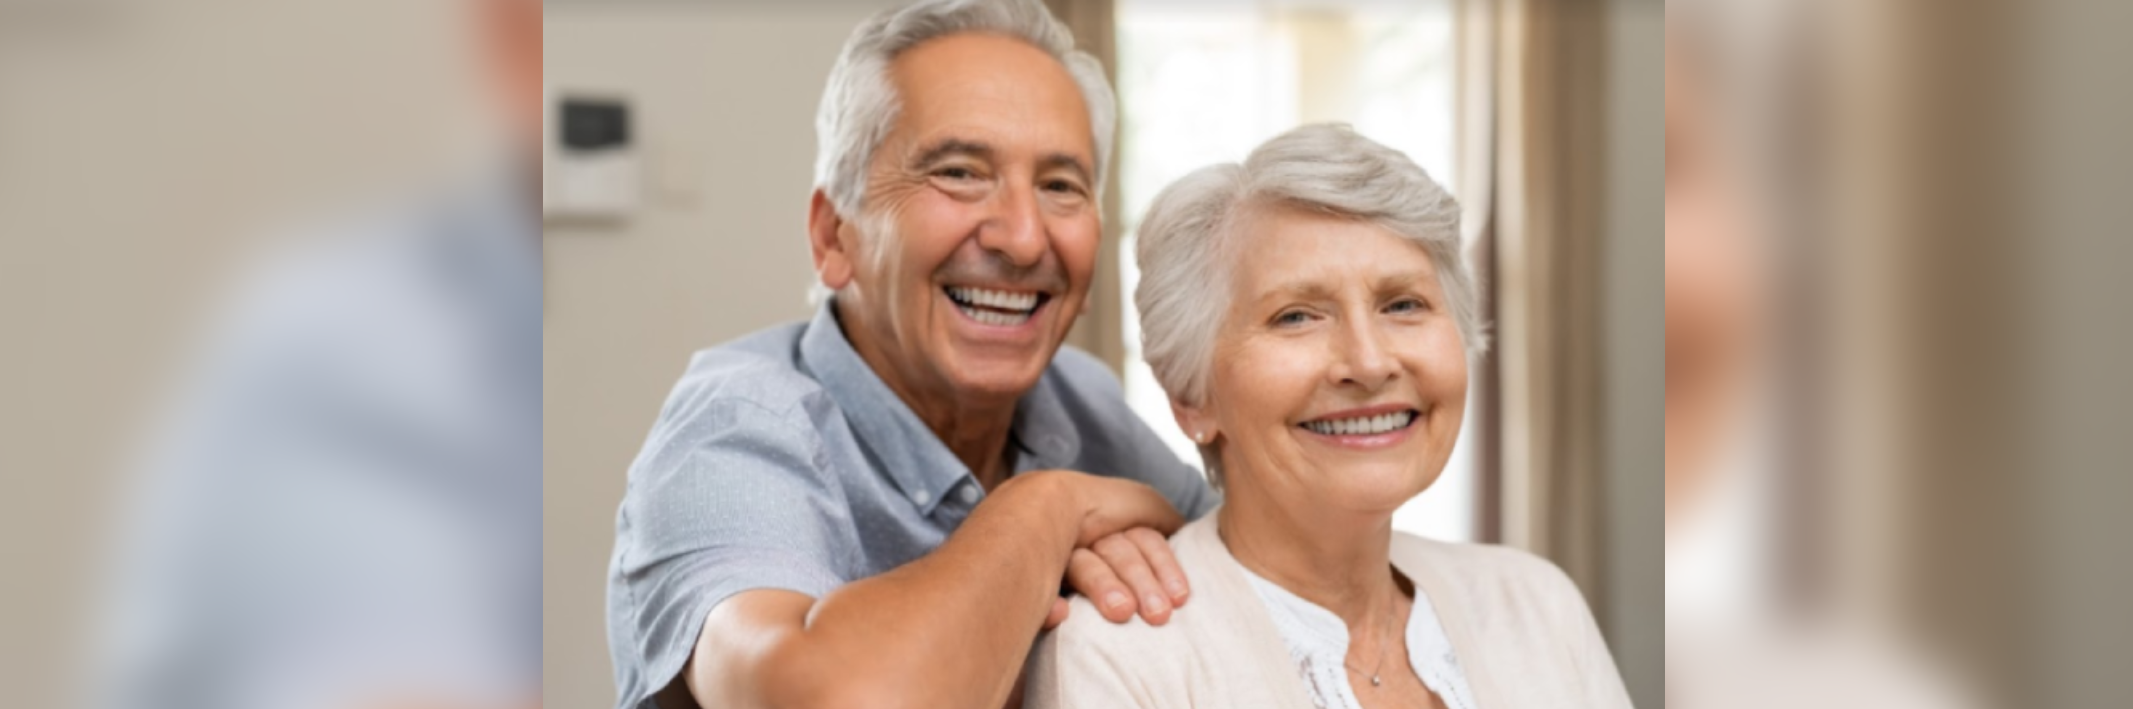 Dentures Can Replace Missing Teeth at Any Age